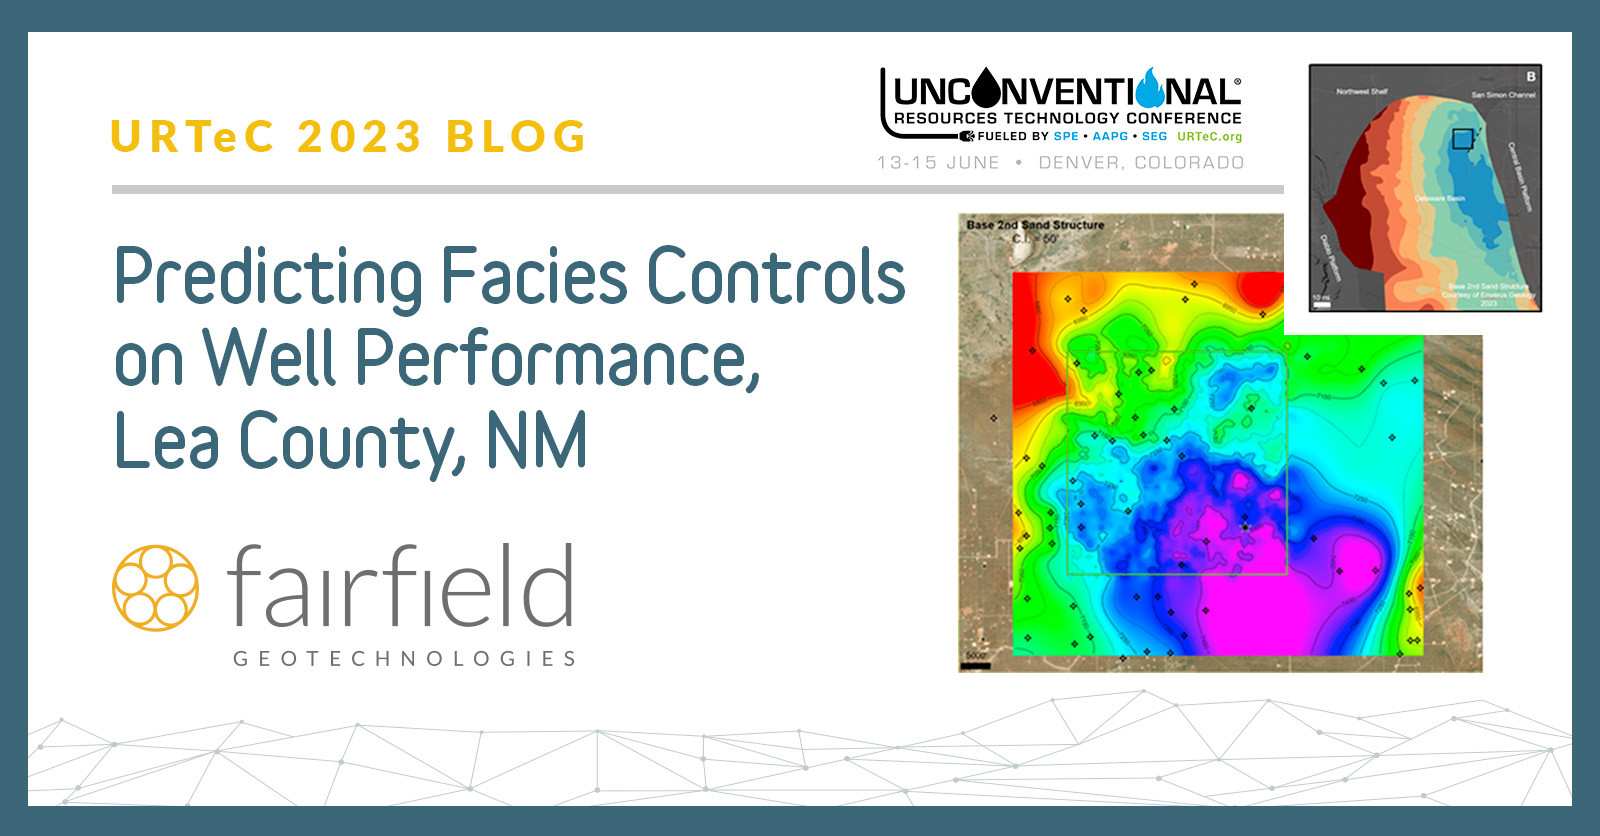 A New Approach to Predicting Facies Controls on Well Performance